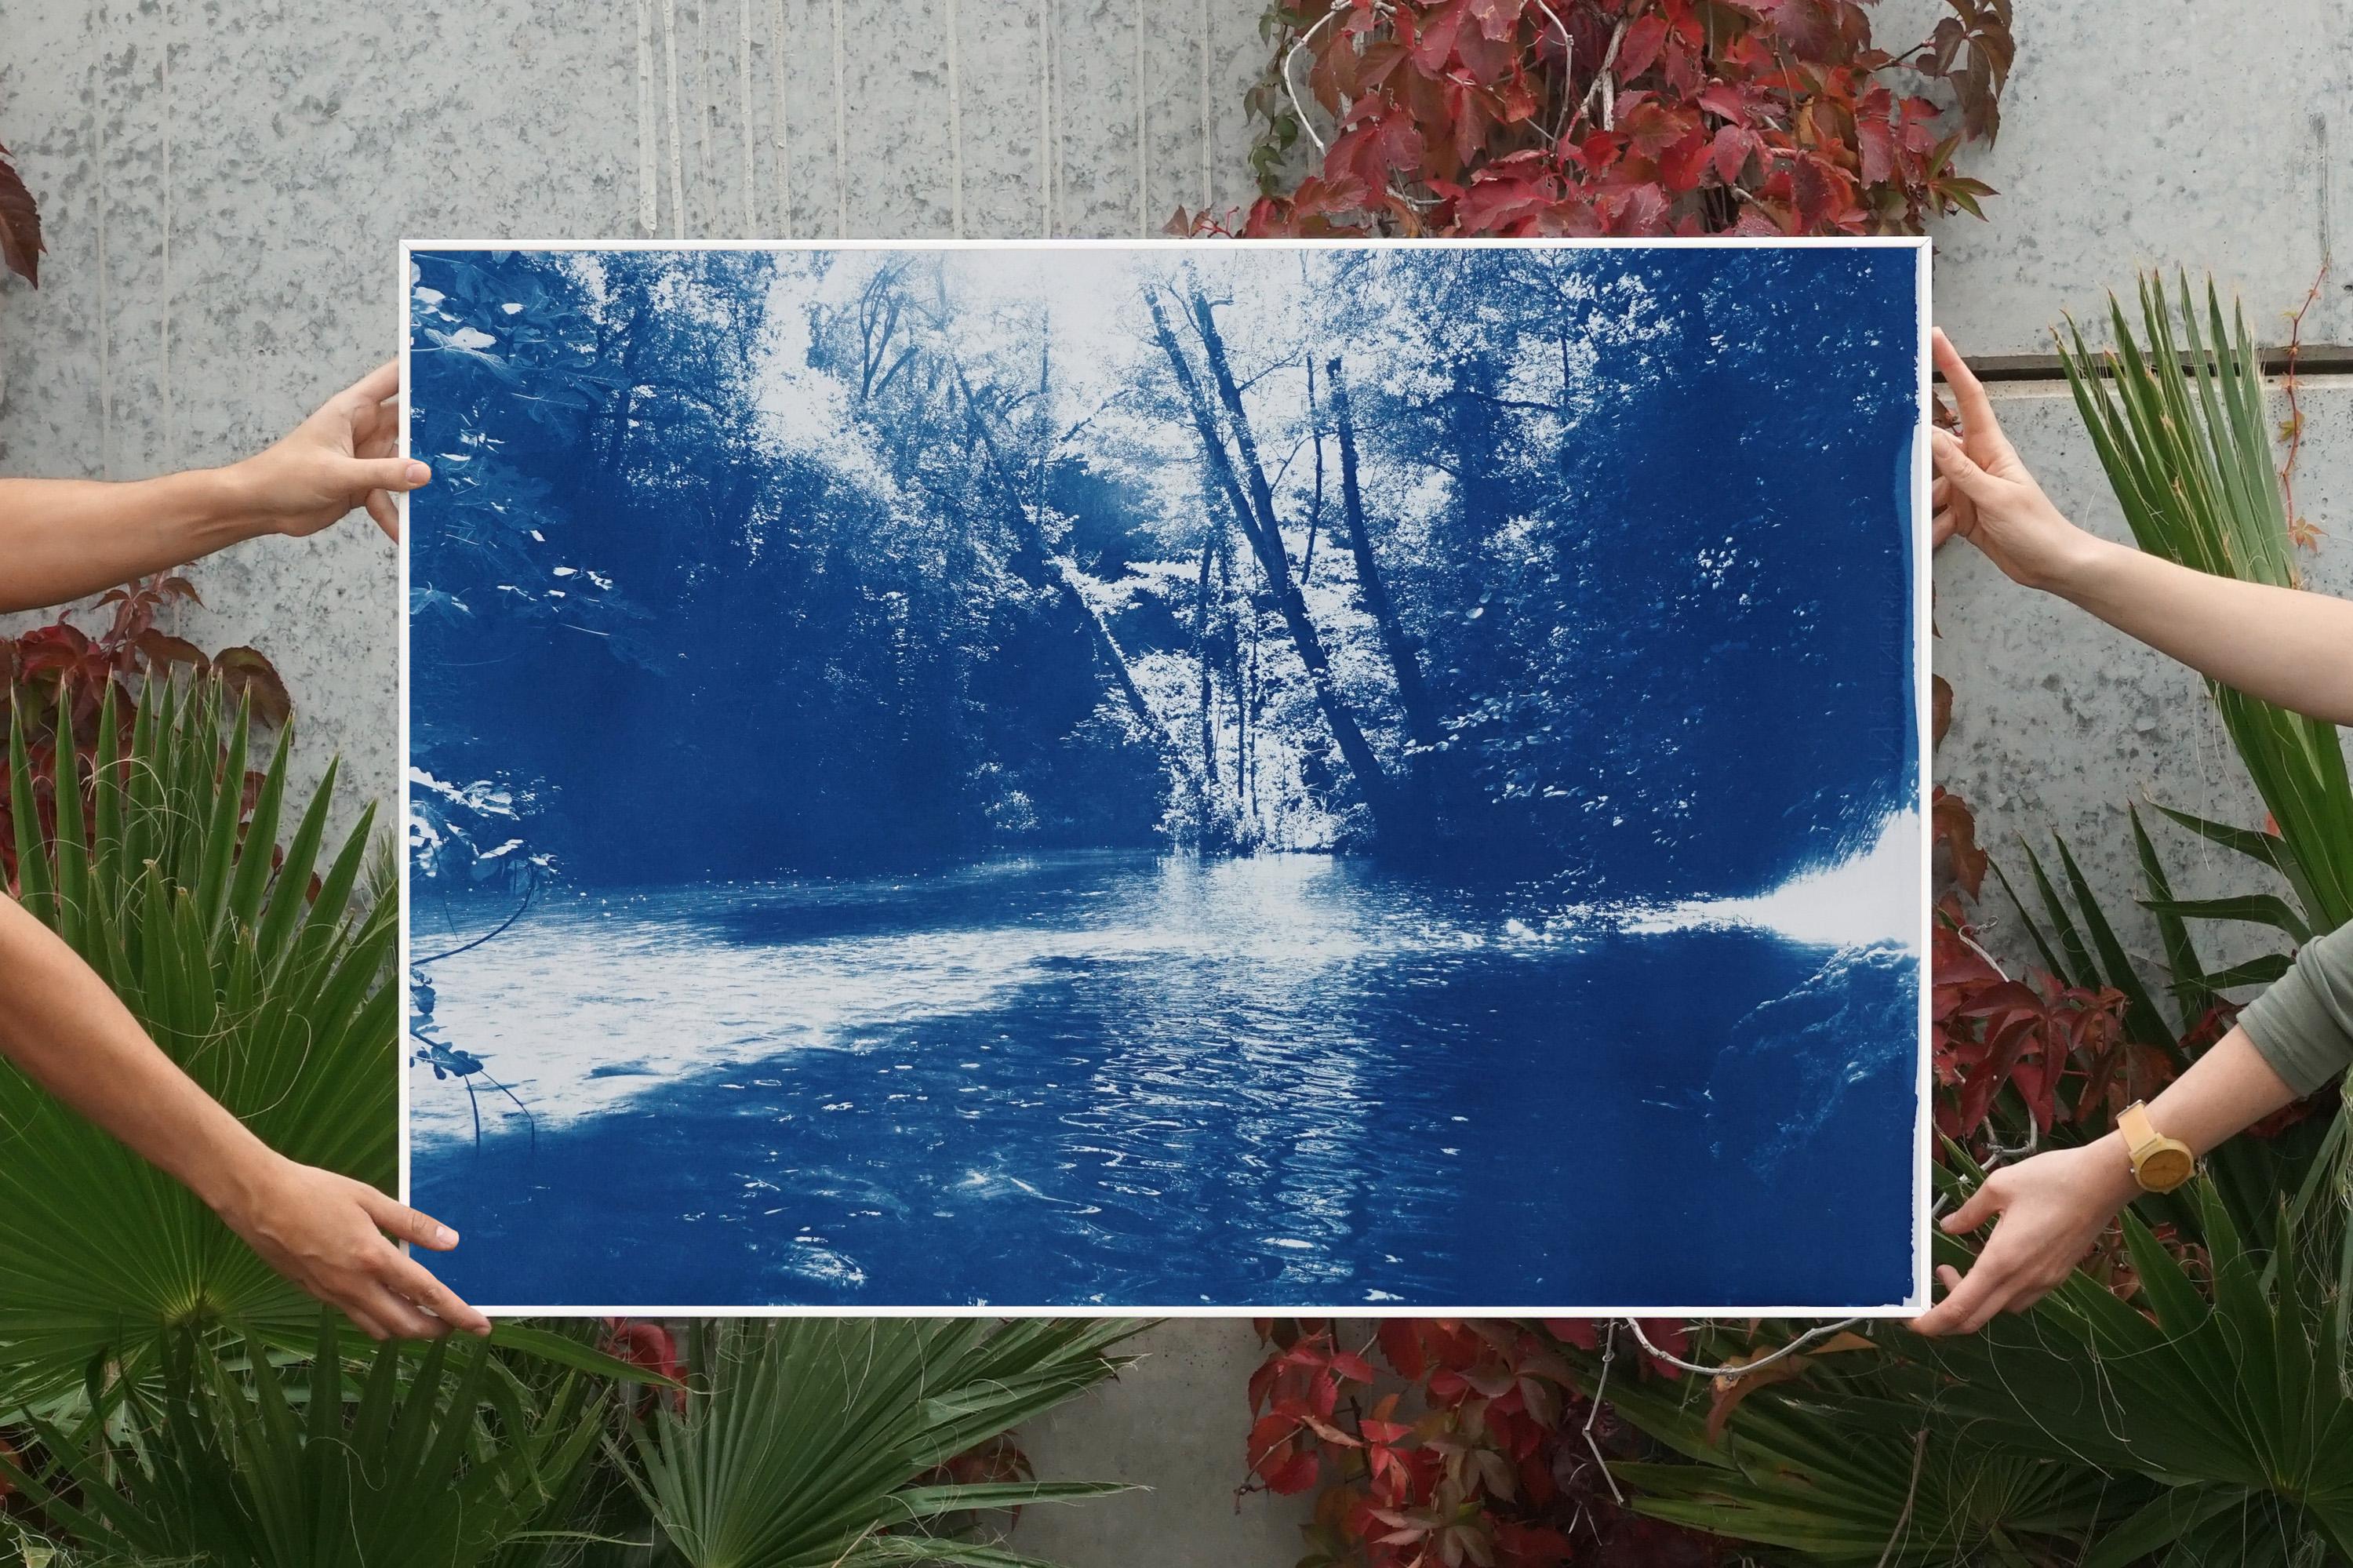 This is an exclusive handprinted limited edition cyanotype.
Lovely scene of a hidden pond in a Scandinavian forest.  

Details:
+ Title: Scandinavian Enchanted Forest
+ Year: 2024
+ Edition Size: 50
+ Stamped and Certificate of Authenticity